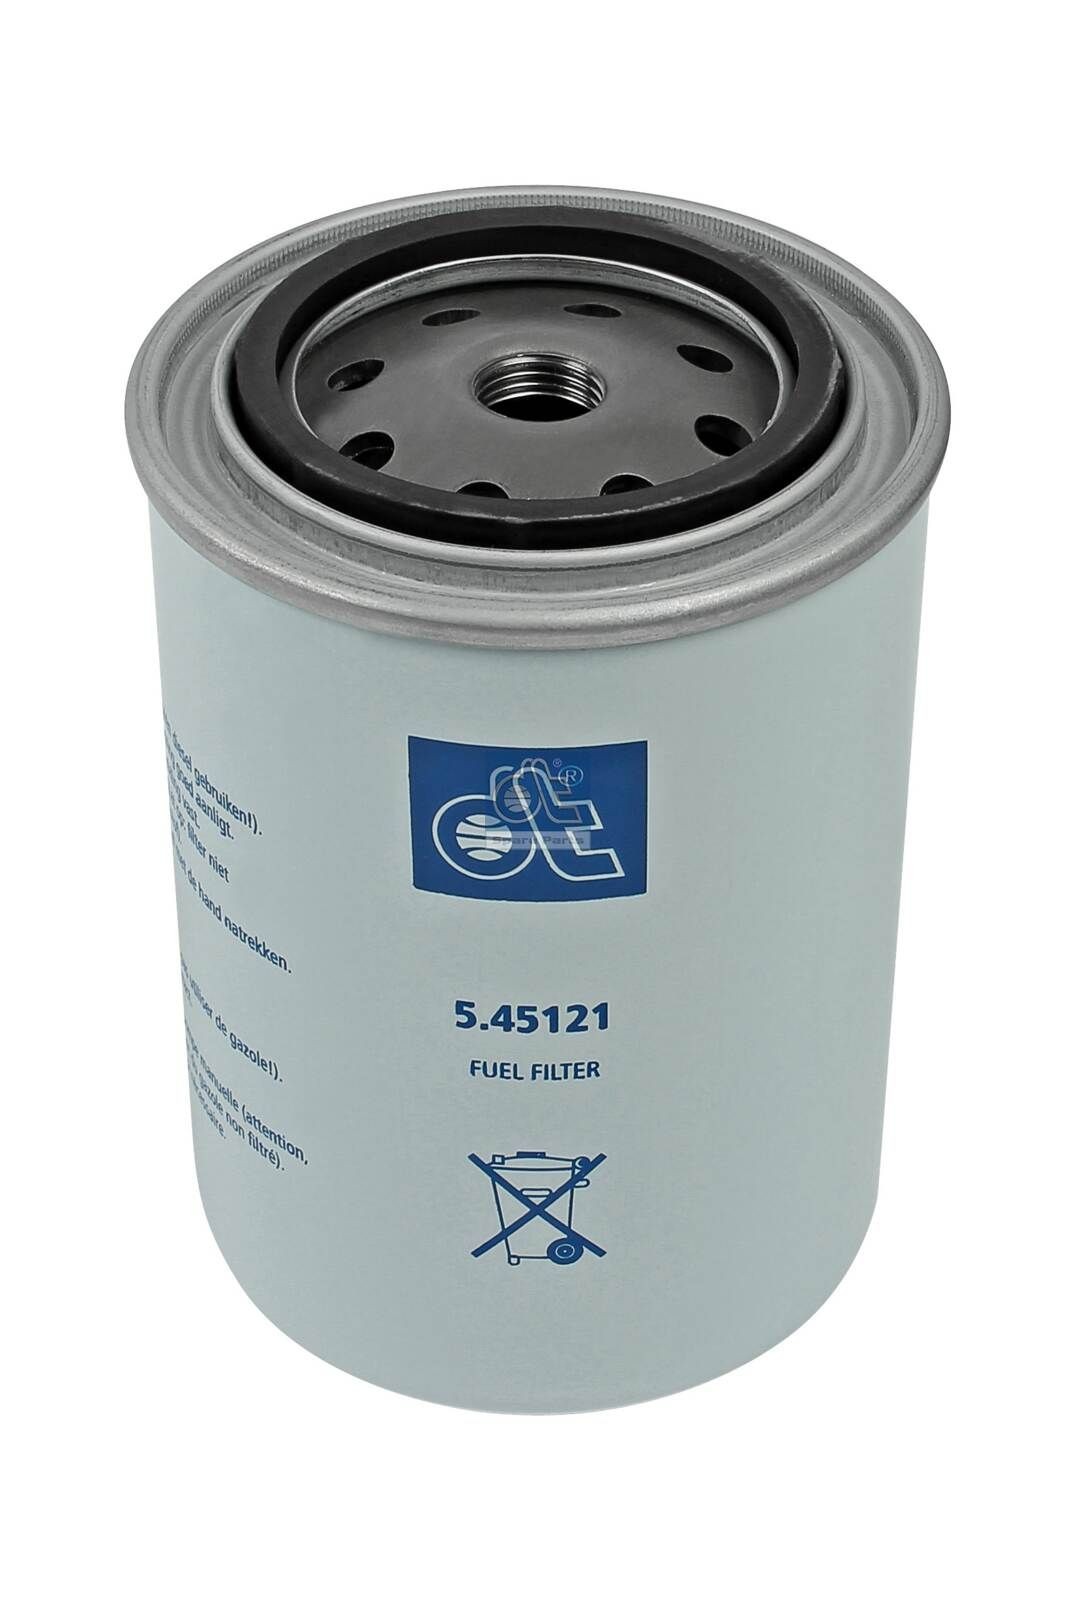 WDK 940/5 DT Spare Parts 5.45121 Fuel filter 1164620